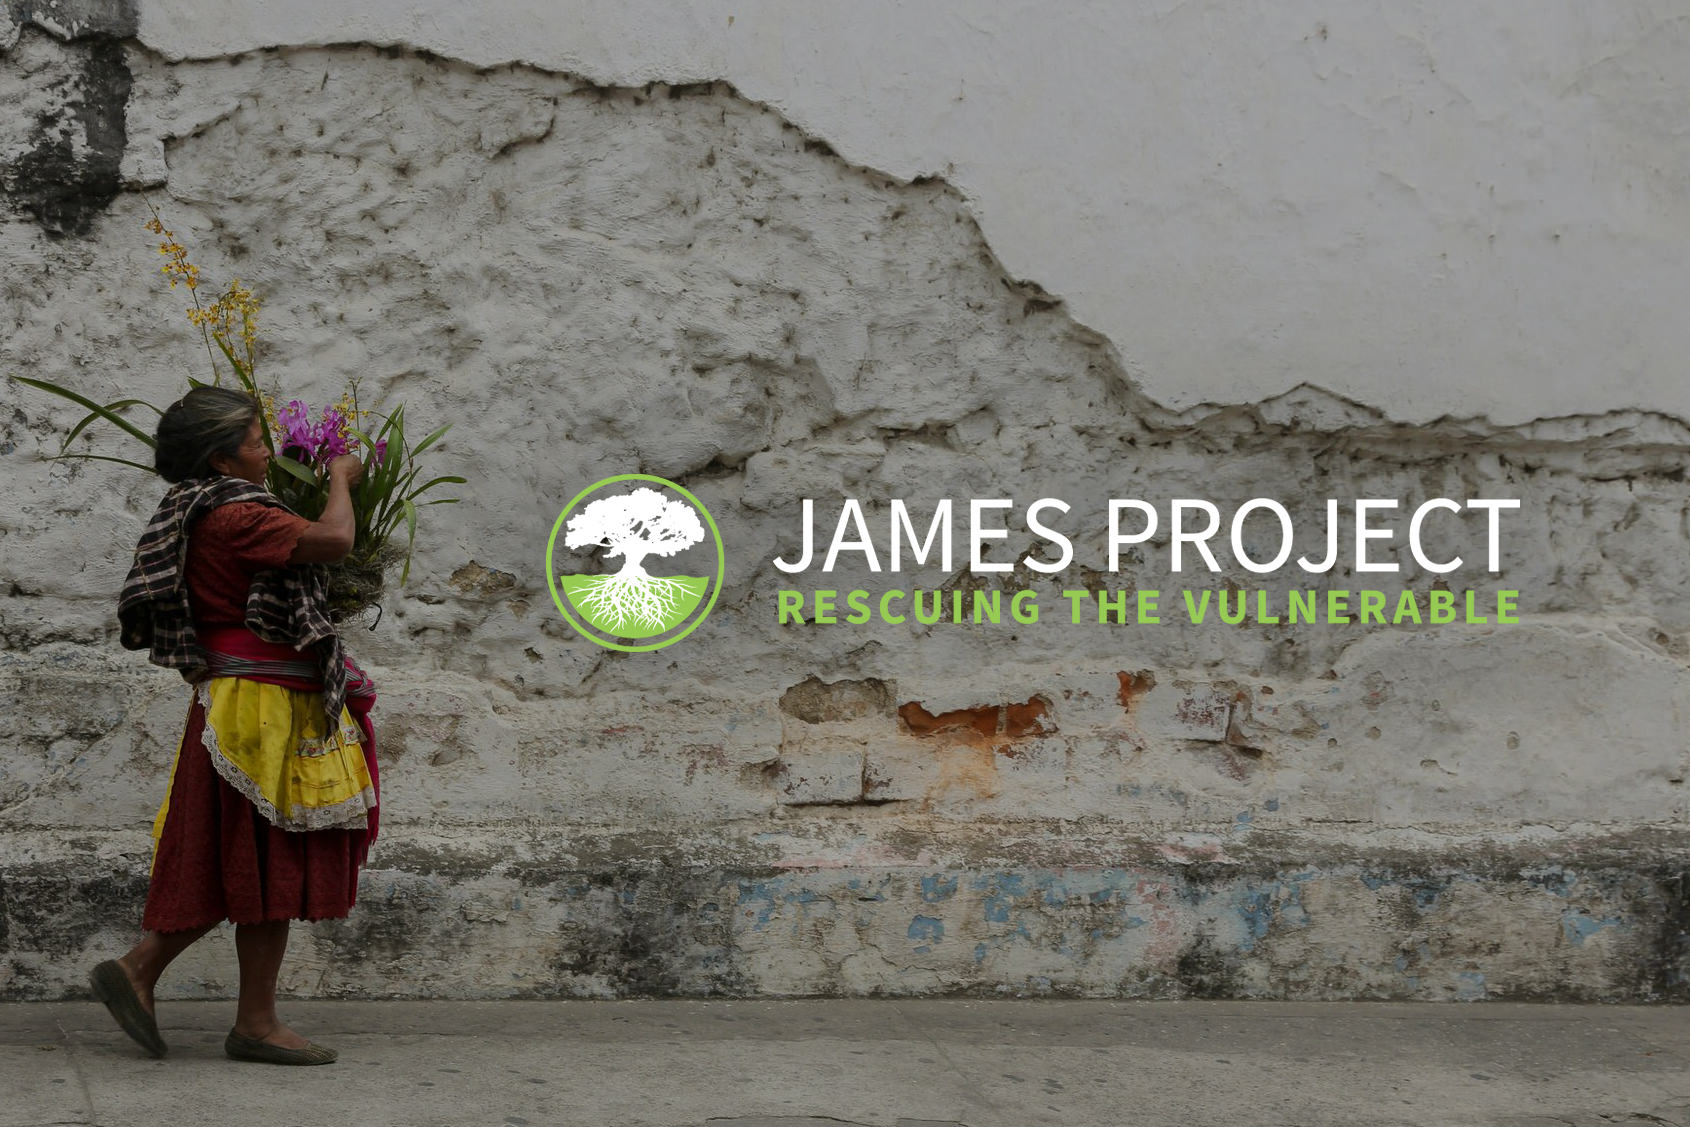 James Project